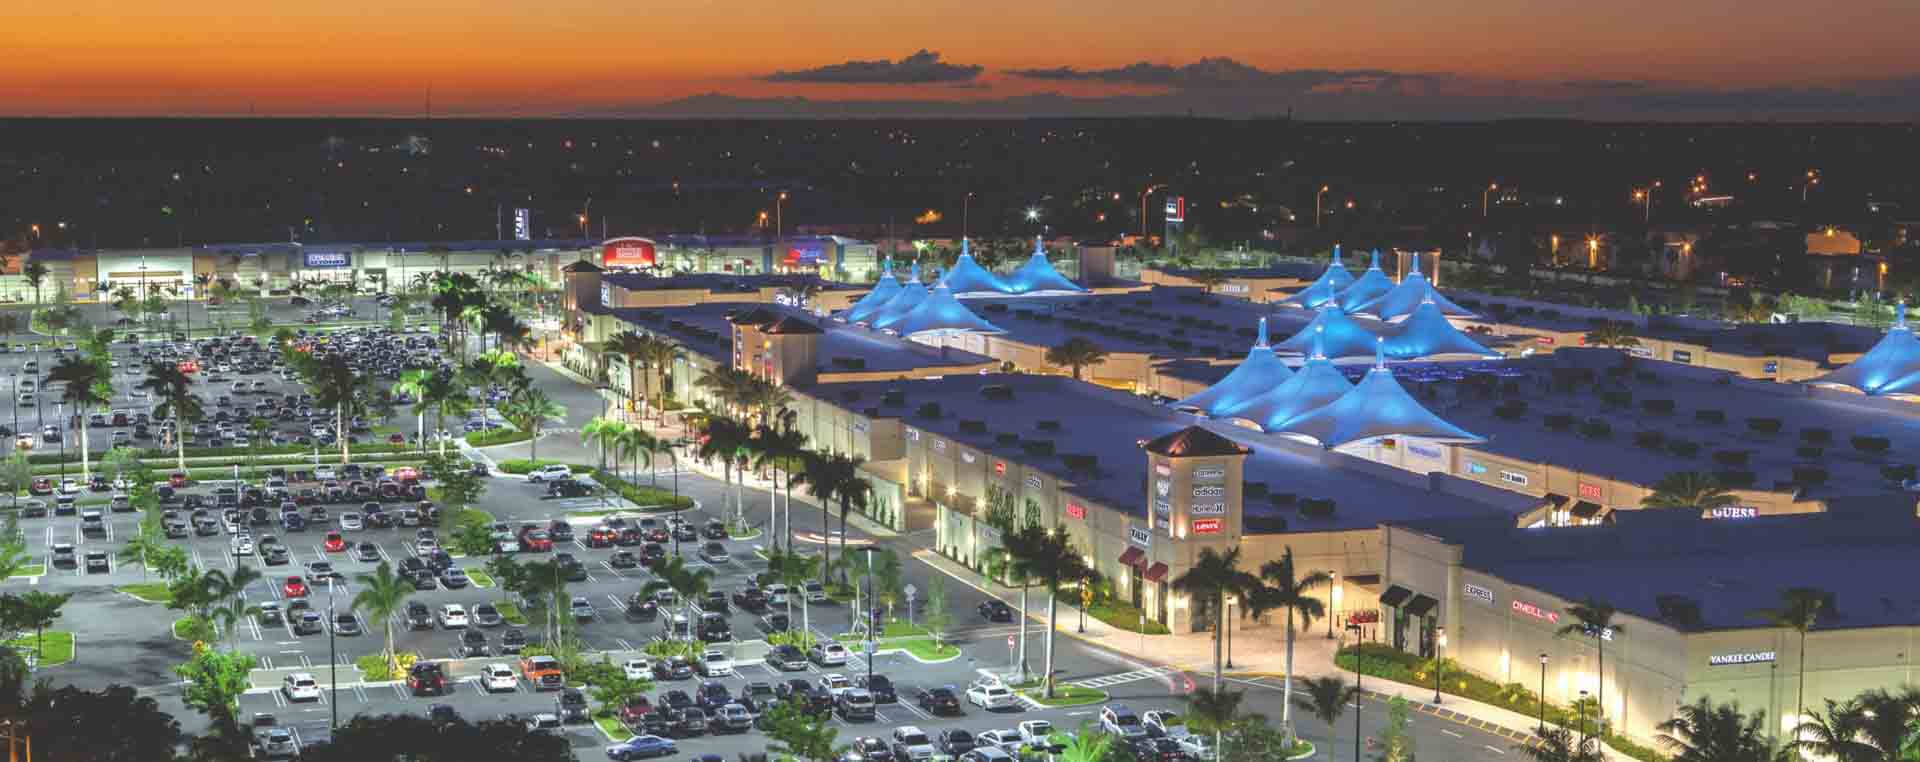 Tanger Outlets Palm Beach Center Images